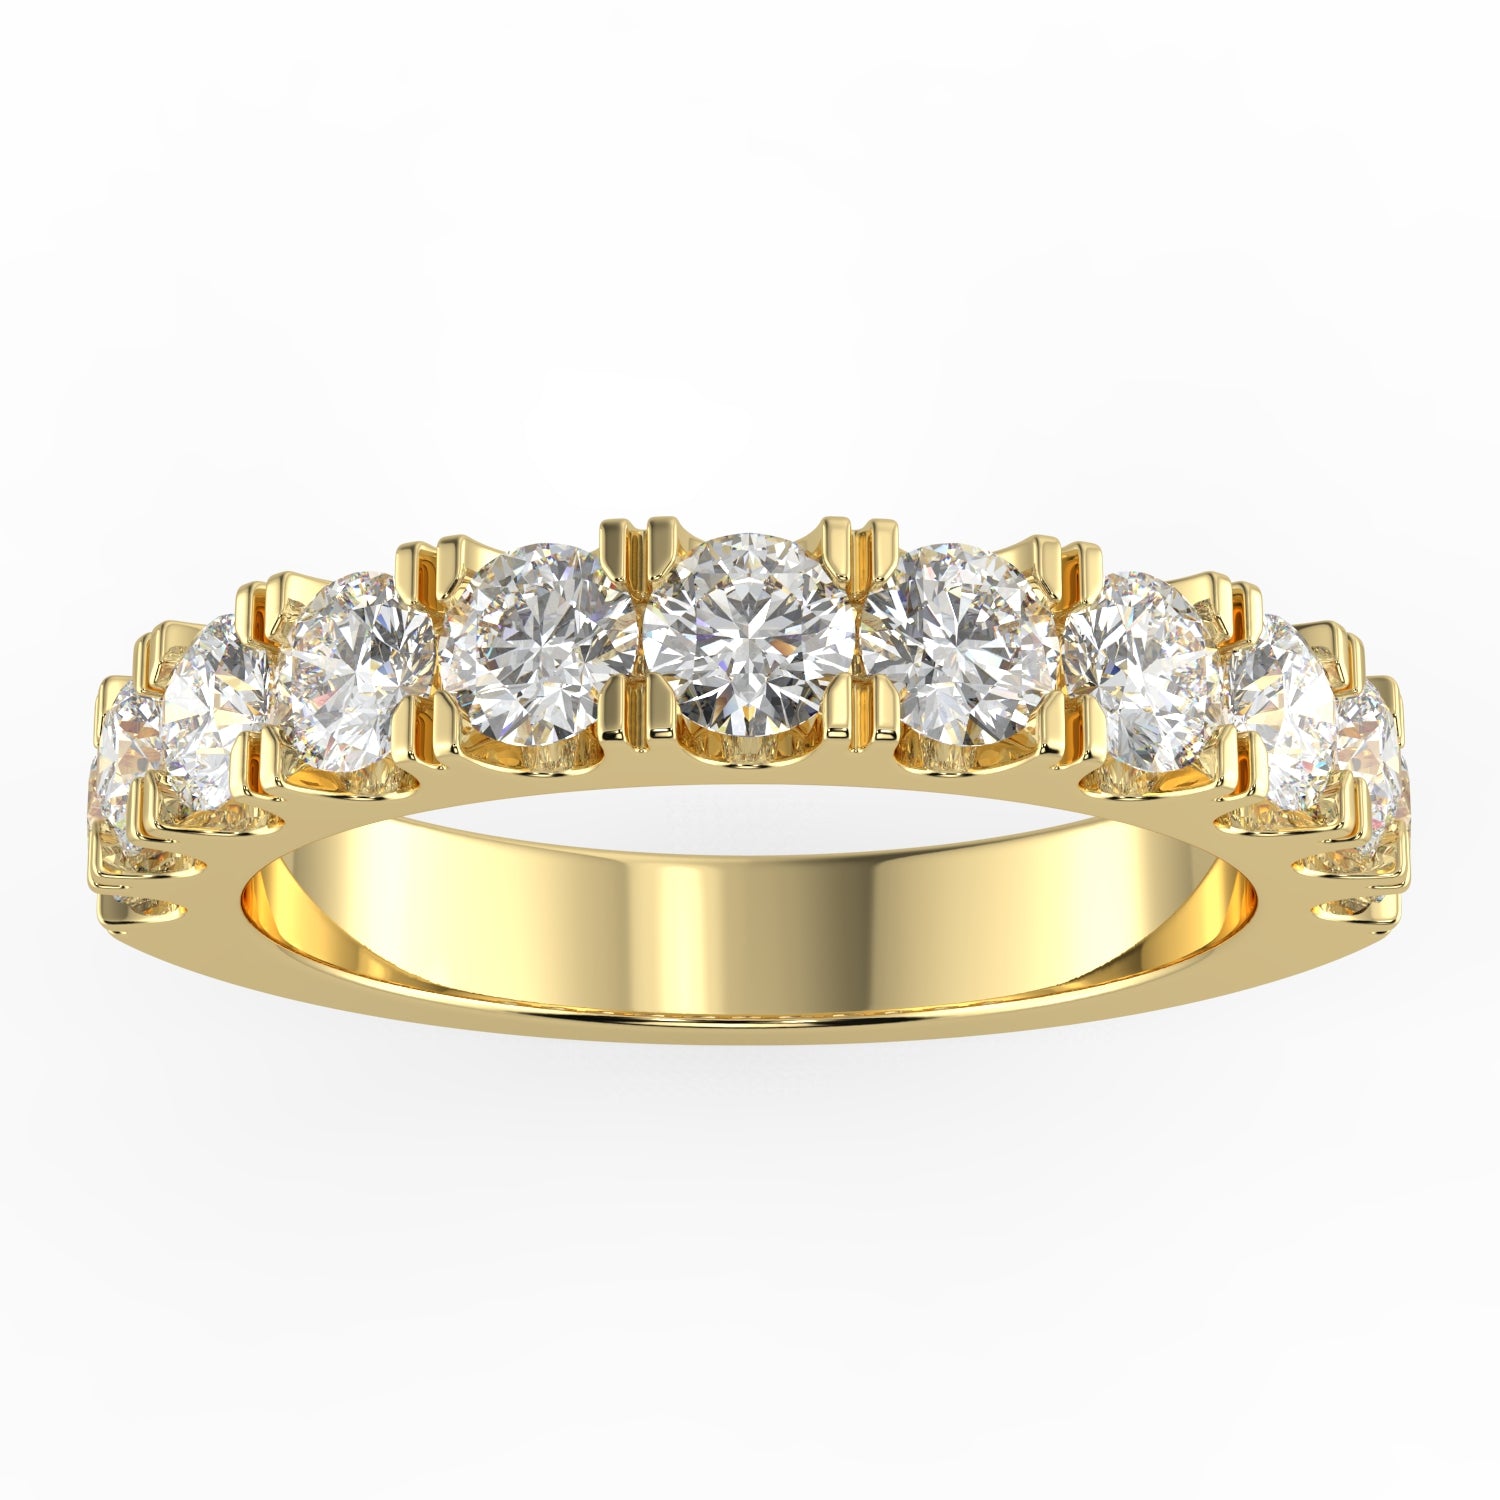 0.1CTW 11 ROUND STONE PRONG SET NATURAL DIAMOND GH/SI HALF ETERNITY WEDDING /ANNIVERSARY BAND SET IN 14K GOLD